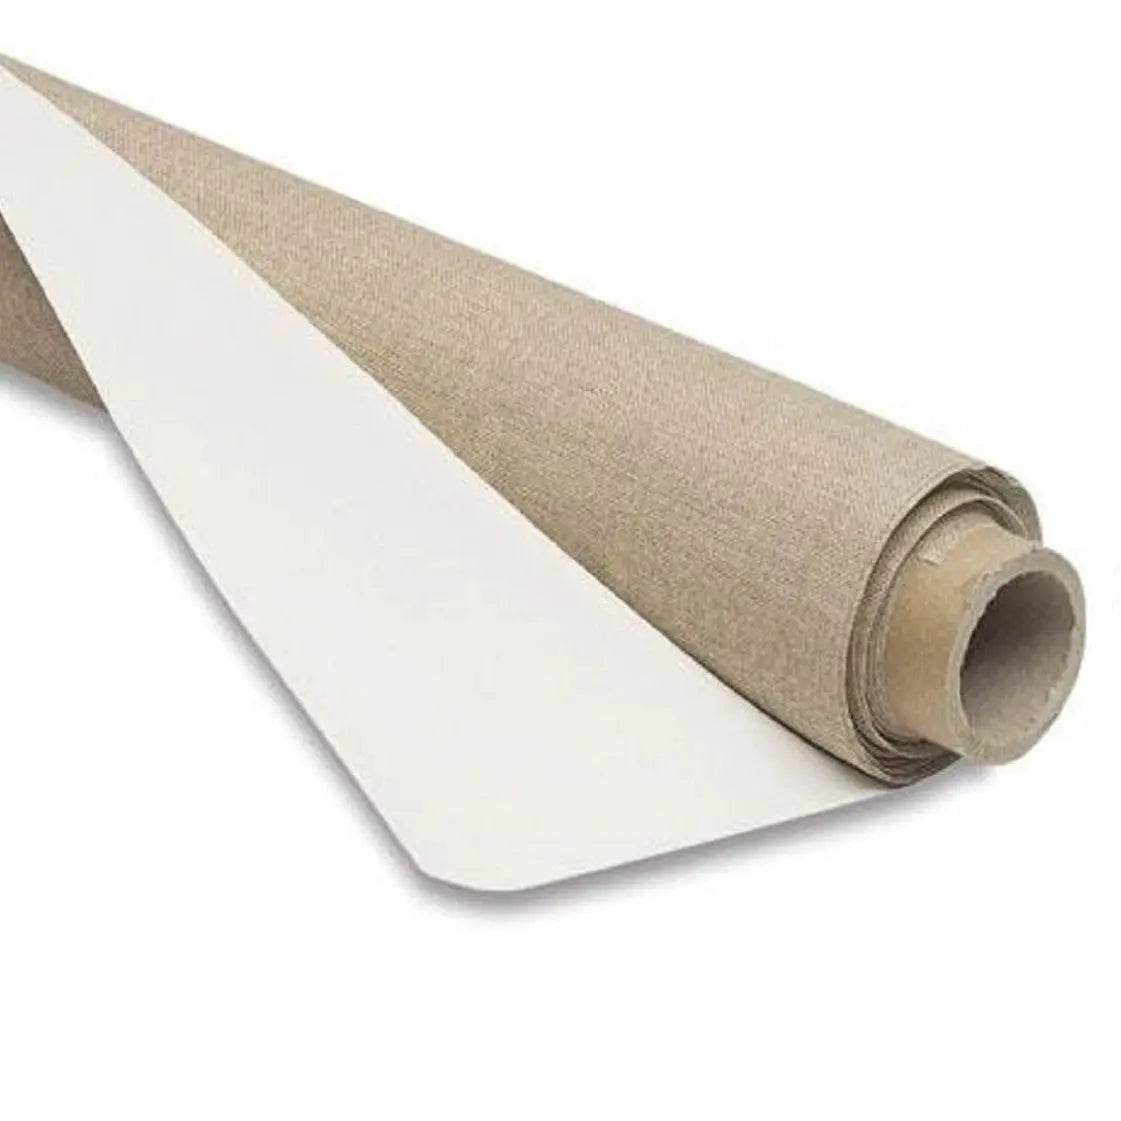 JAGS Canvas Roll For Painting 42 Inch x 5 Meter Long - White - Medium Grain  Double Acrylic Titanium Primed Cotton Canvas Cloth